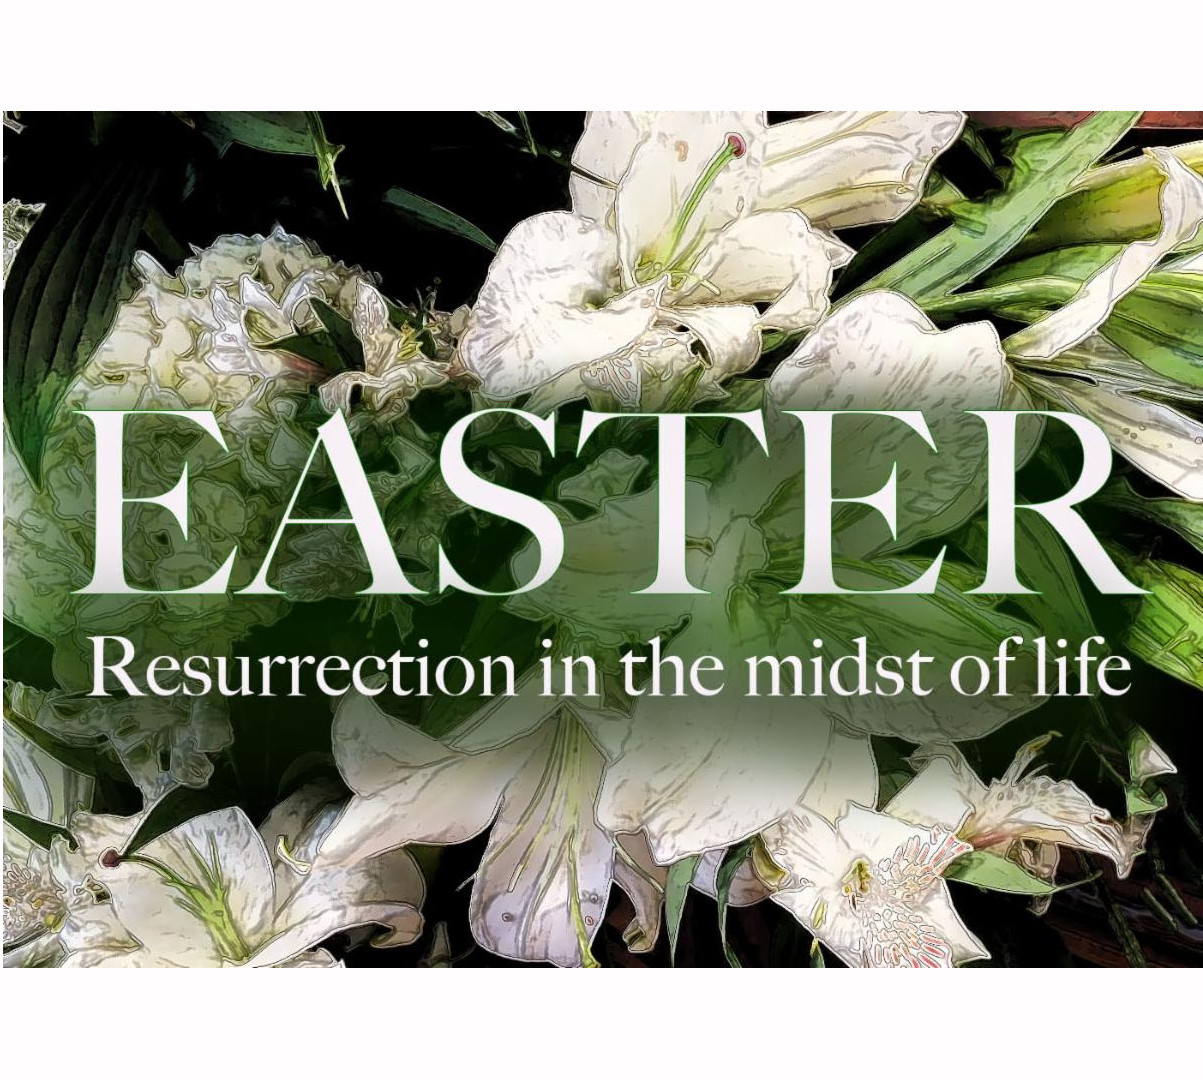 Resurrection in the midst of life